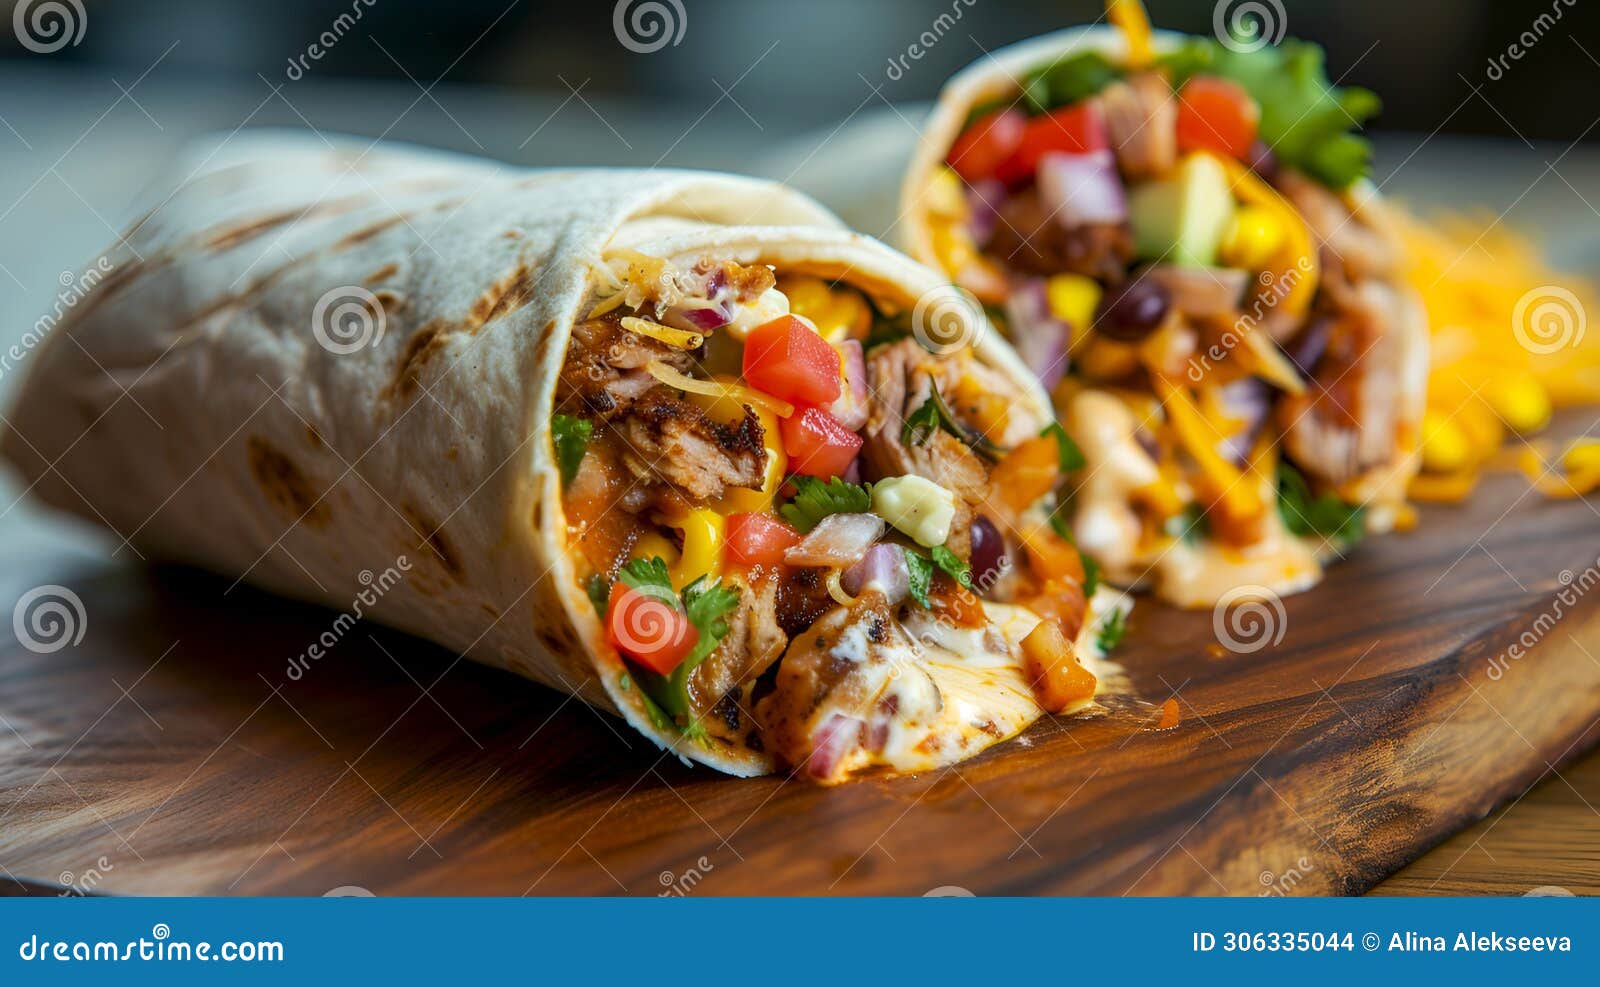 burrito con carne, traditional mexican food for cinqo de mayo. grilled chicken burrito with veggie filling. hearty burrito with